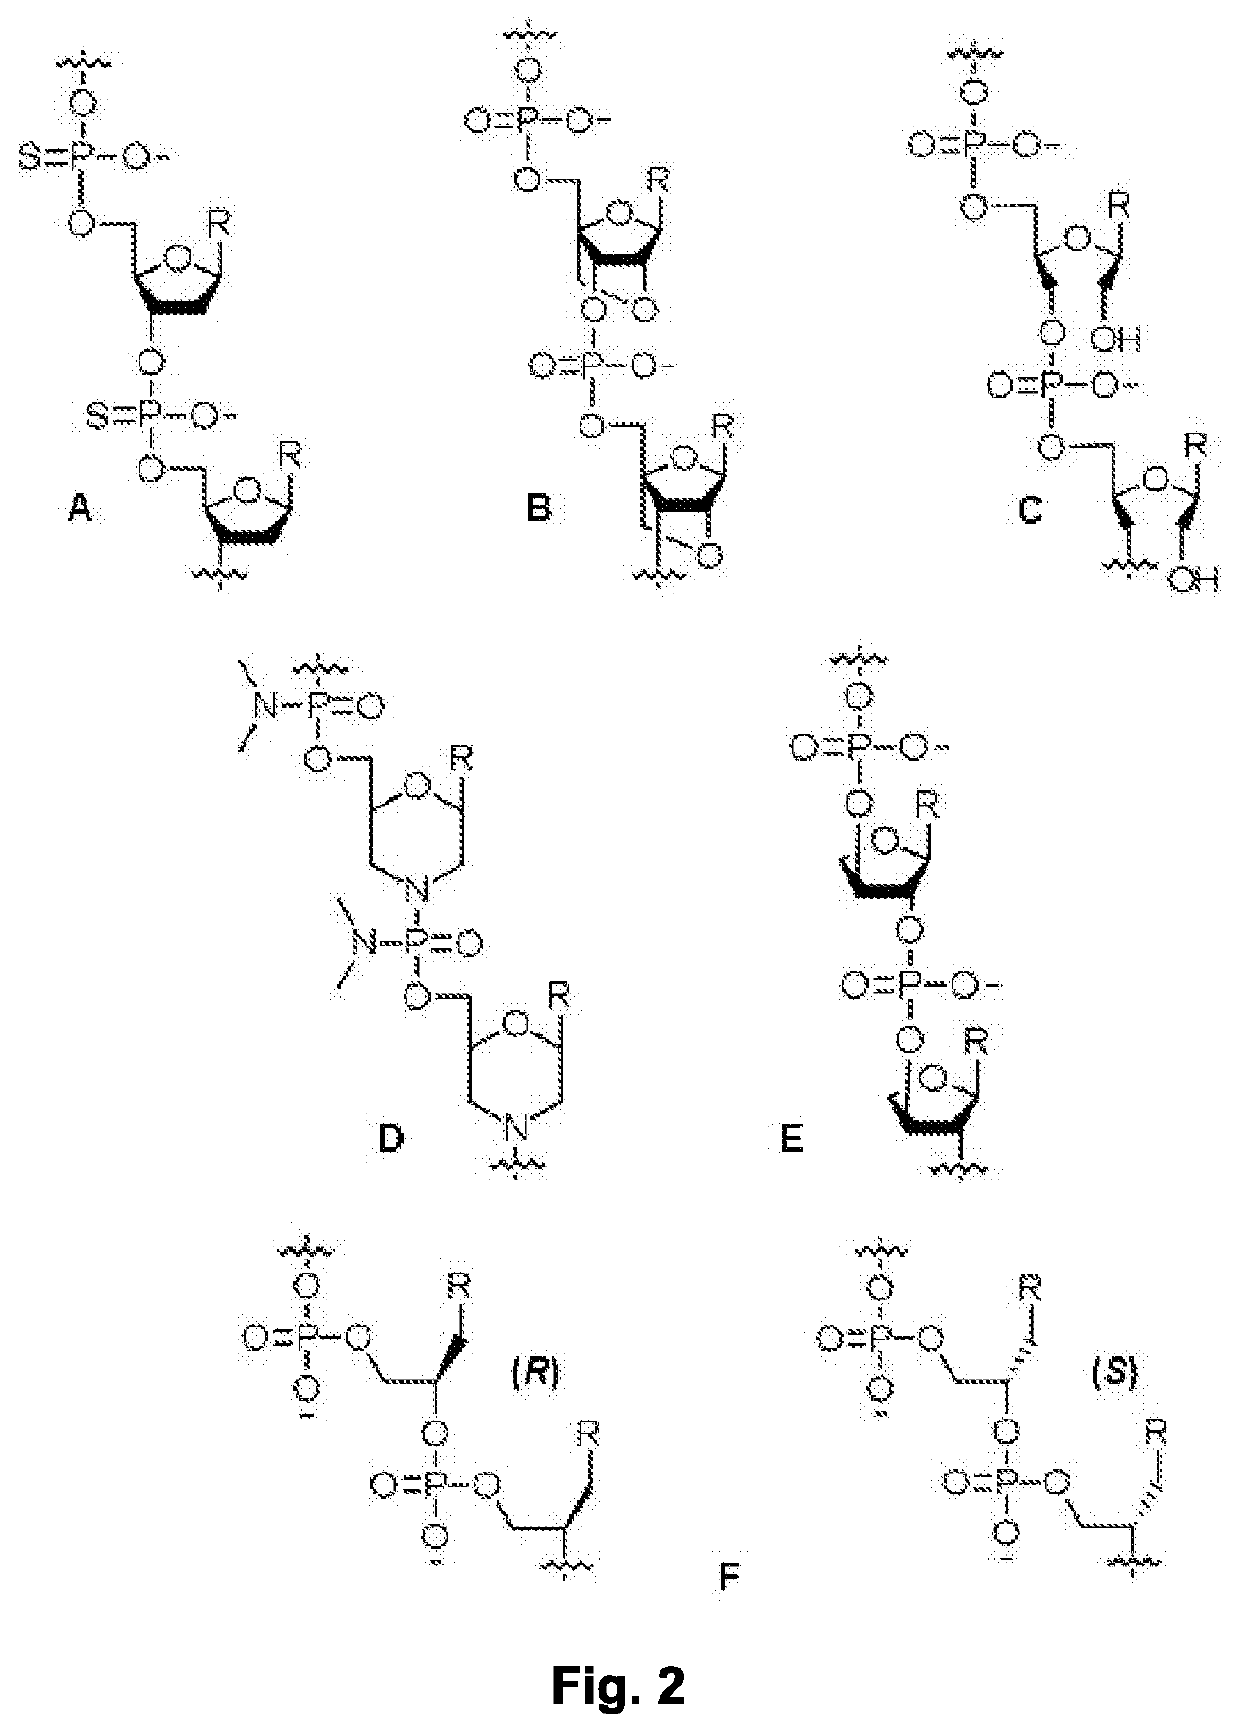 Bivalent Nucleic Acid Ligands and Uses Therefor